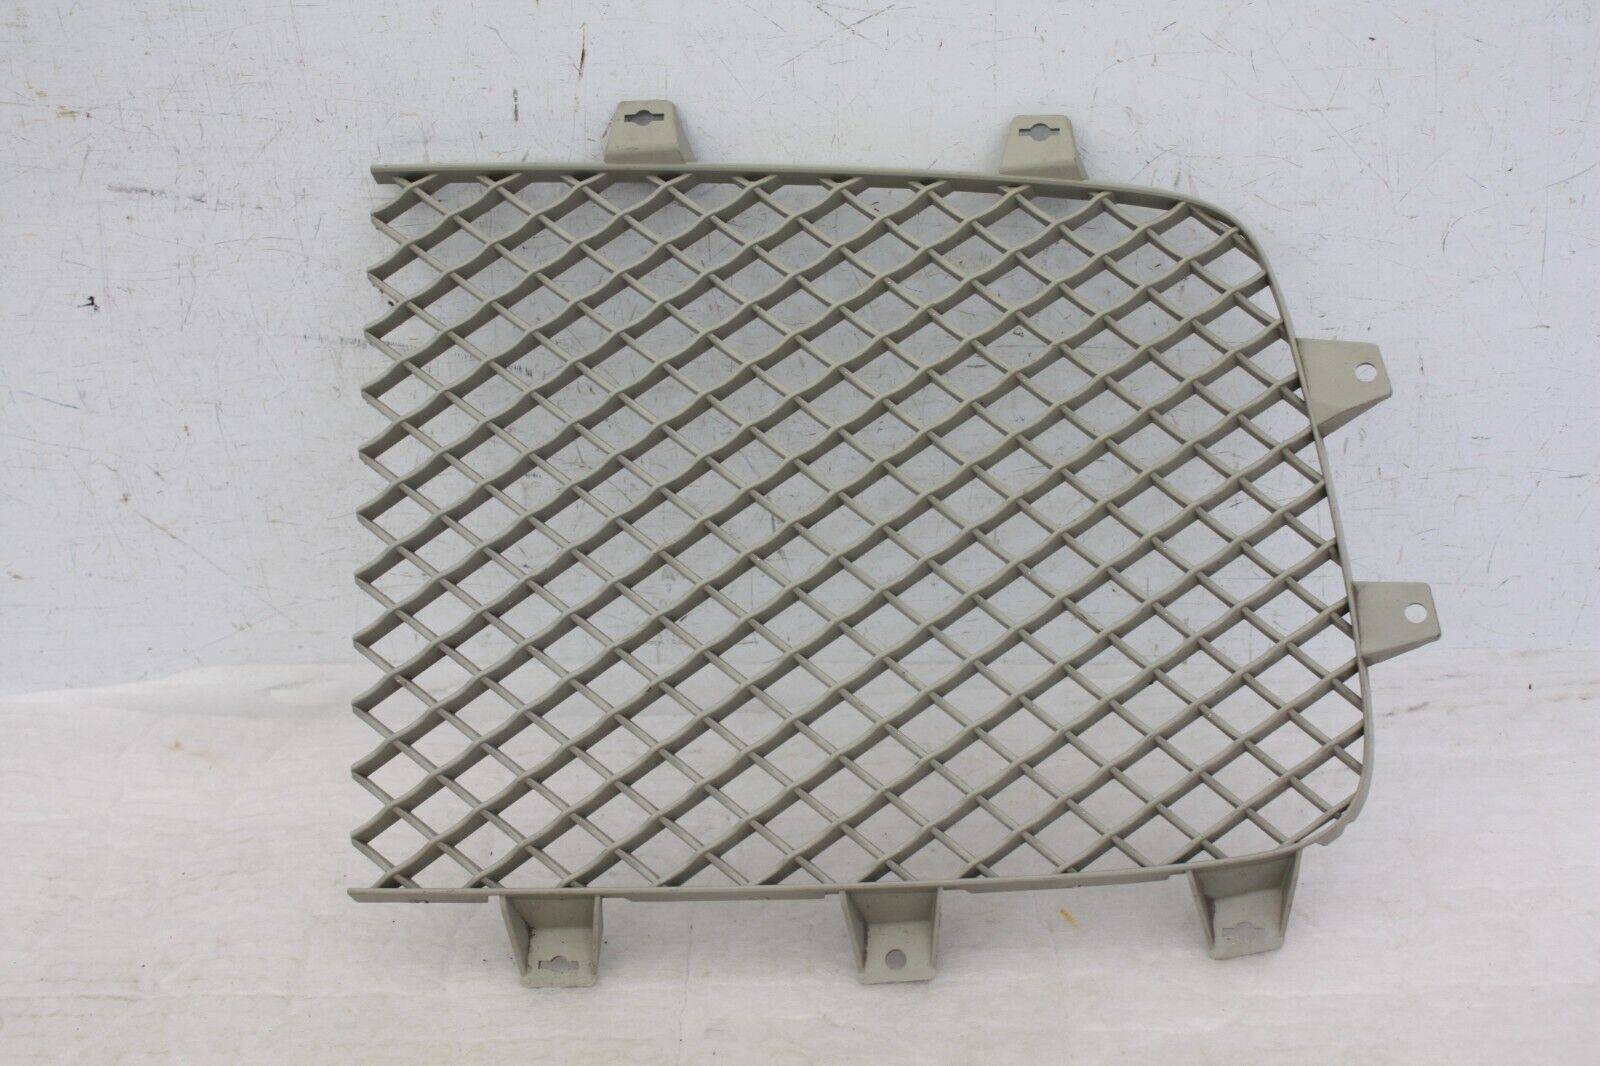 Bentley-Continental-GT-GTC-Front-Bumper-Right-Radiator-Grill-3W3853684-Genuine-176347091889